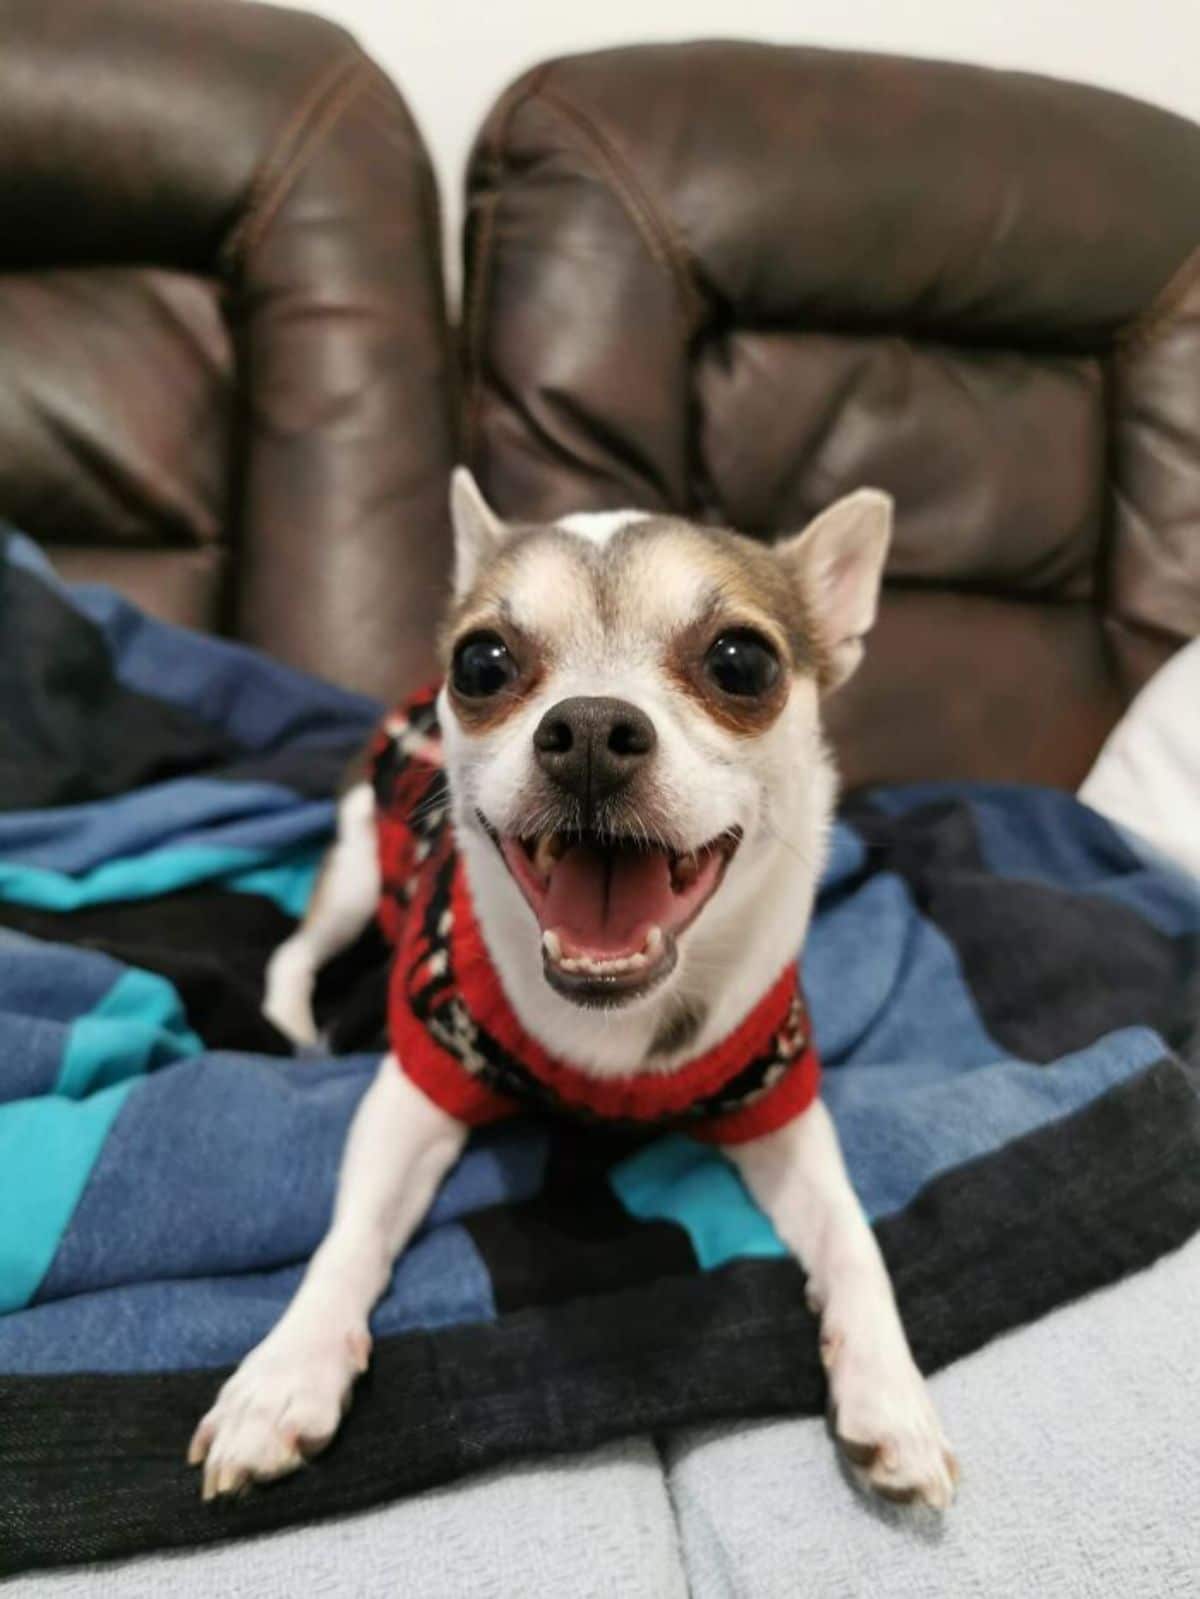 smiling white and grey chihuahua in a red white and black sweater on a blue and black blanket on a brown sofa